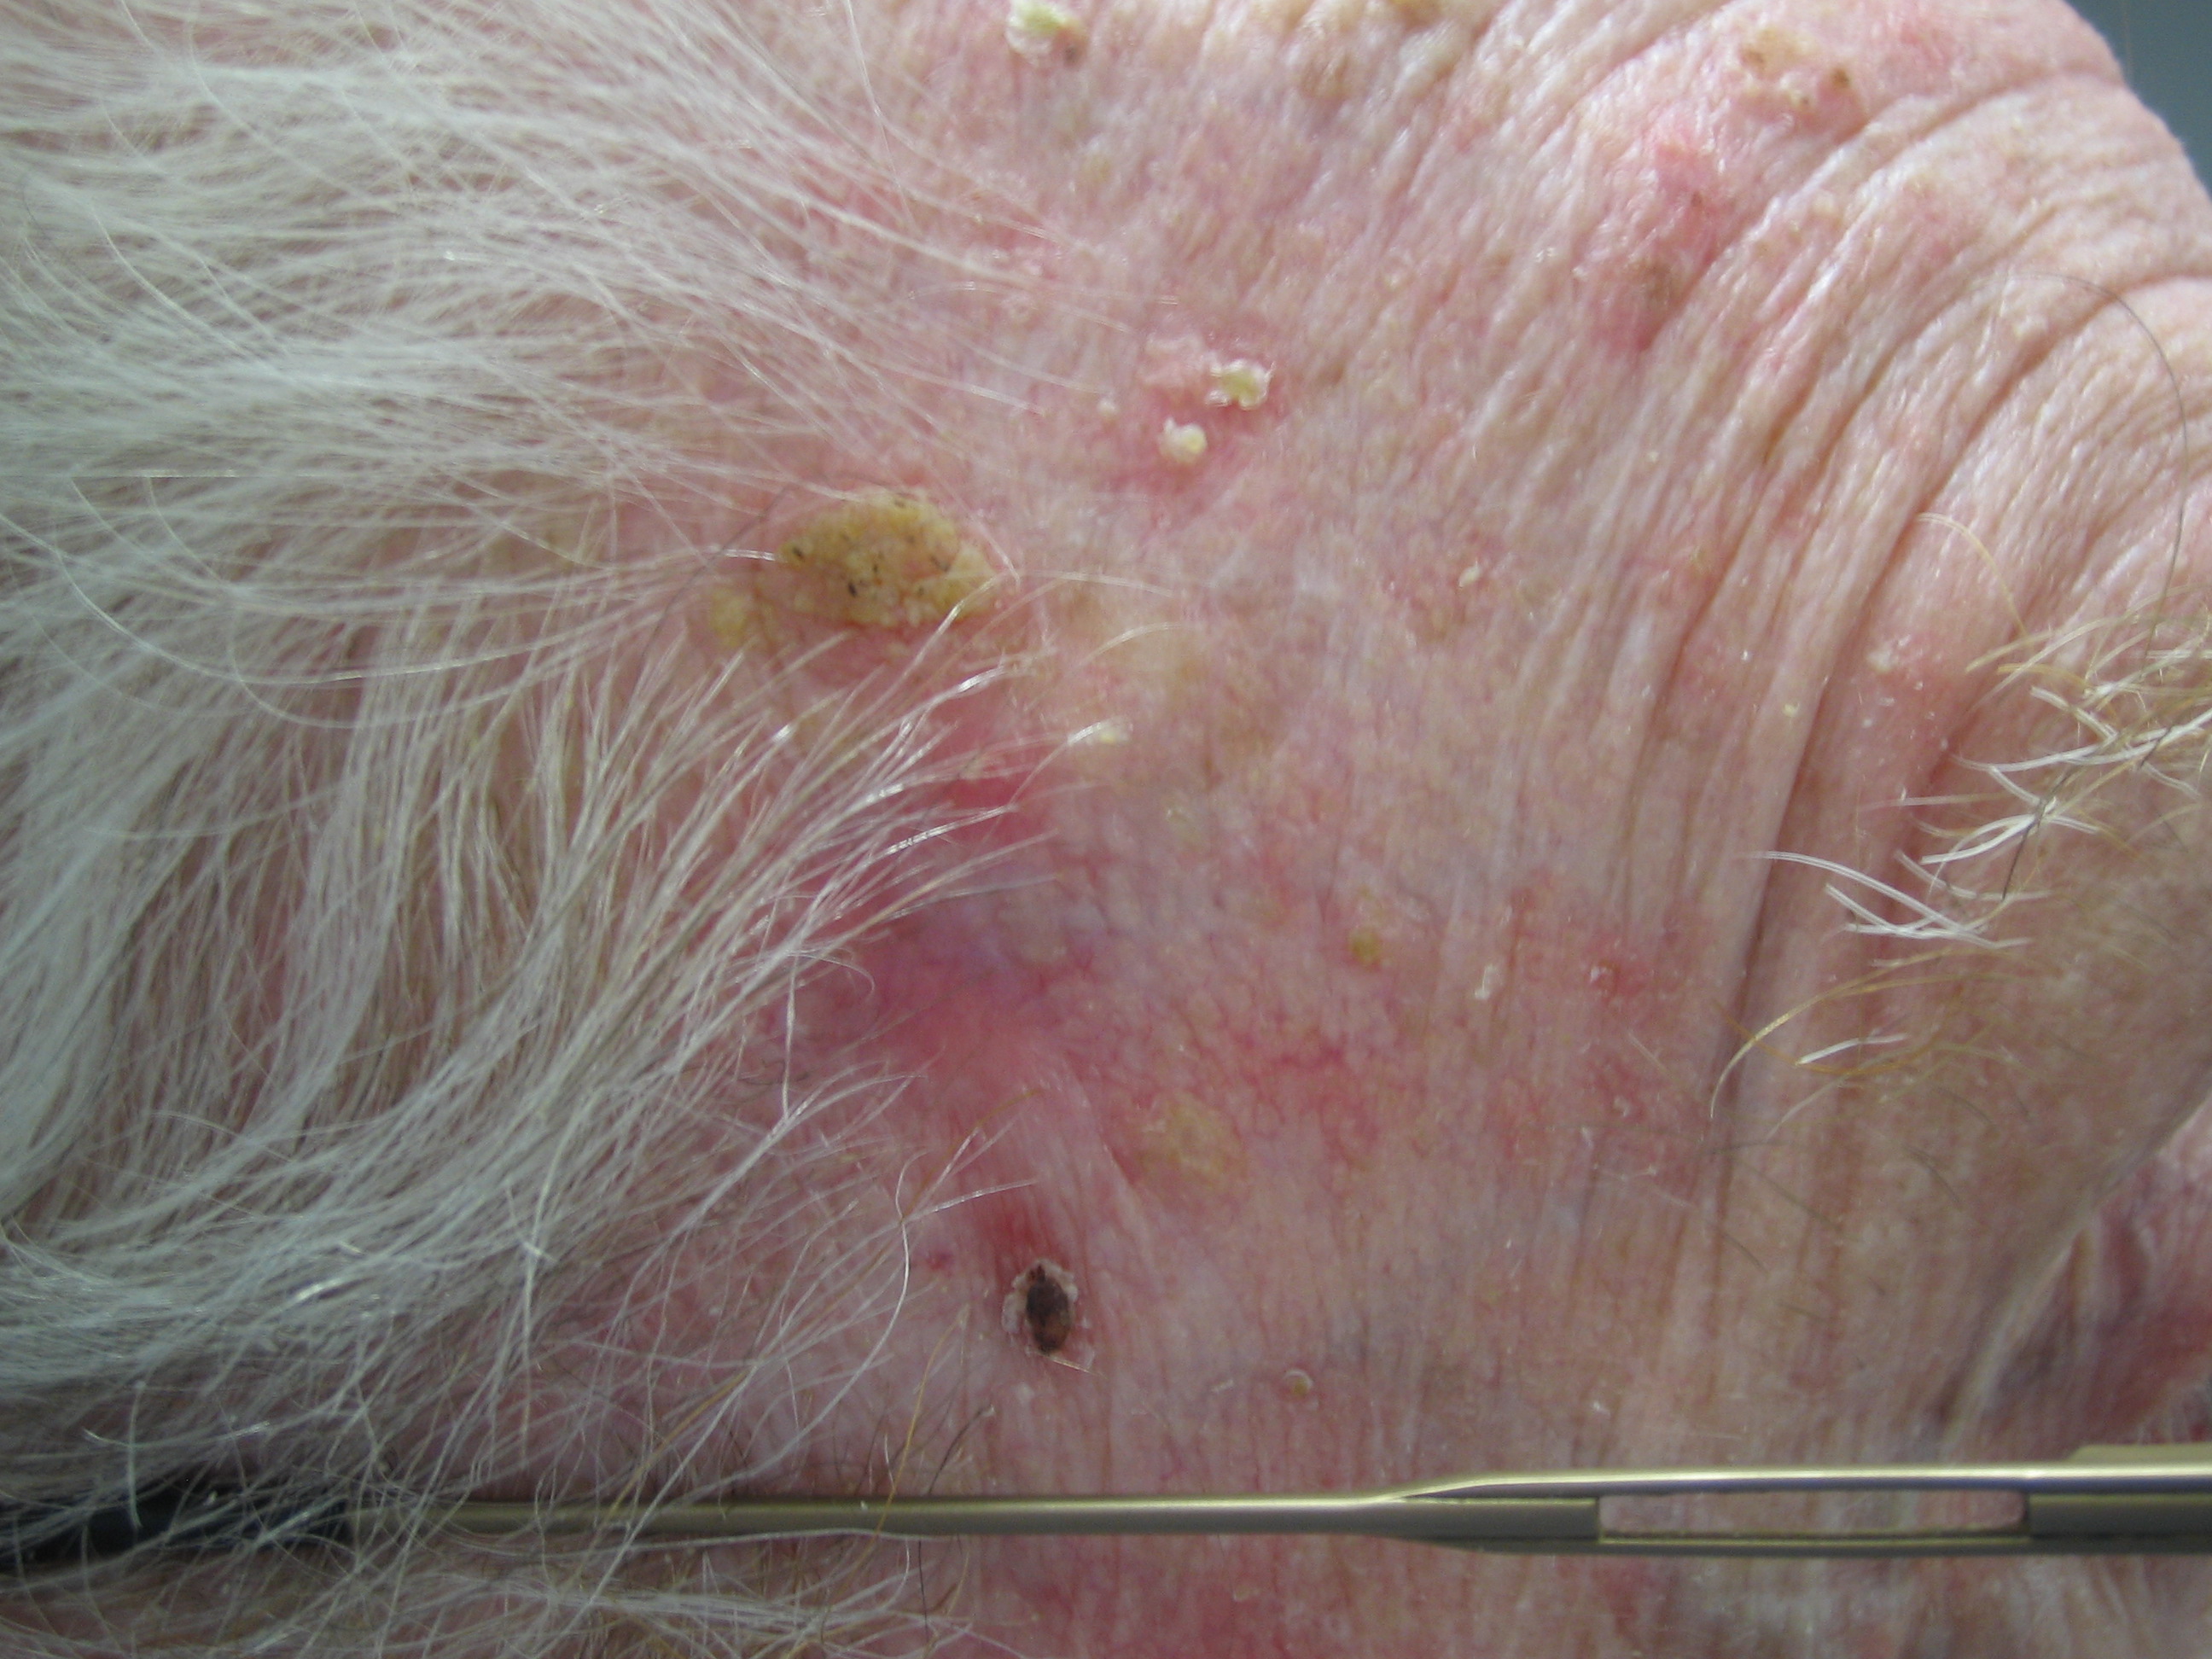 Bowen S Disease Squamous Cell Carcinoma In Situ Erythroplasia Of Queyrat Squamous Cell